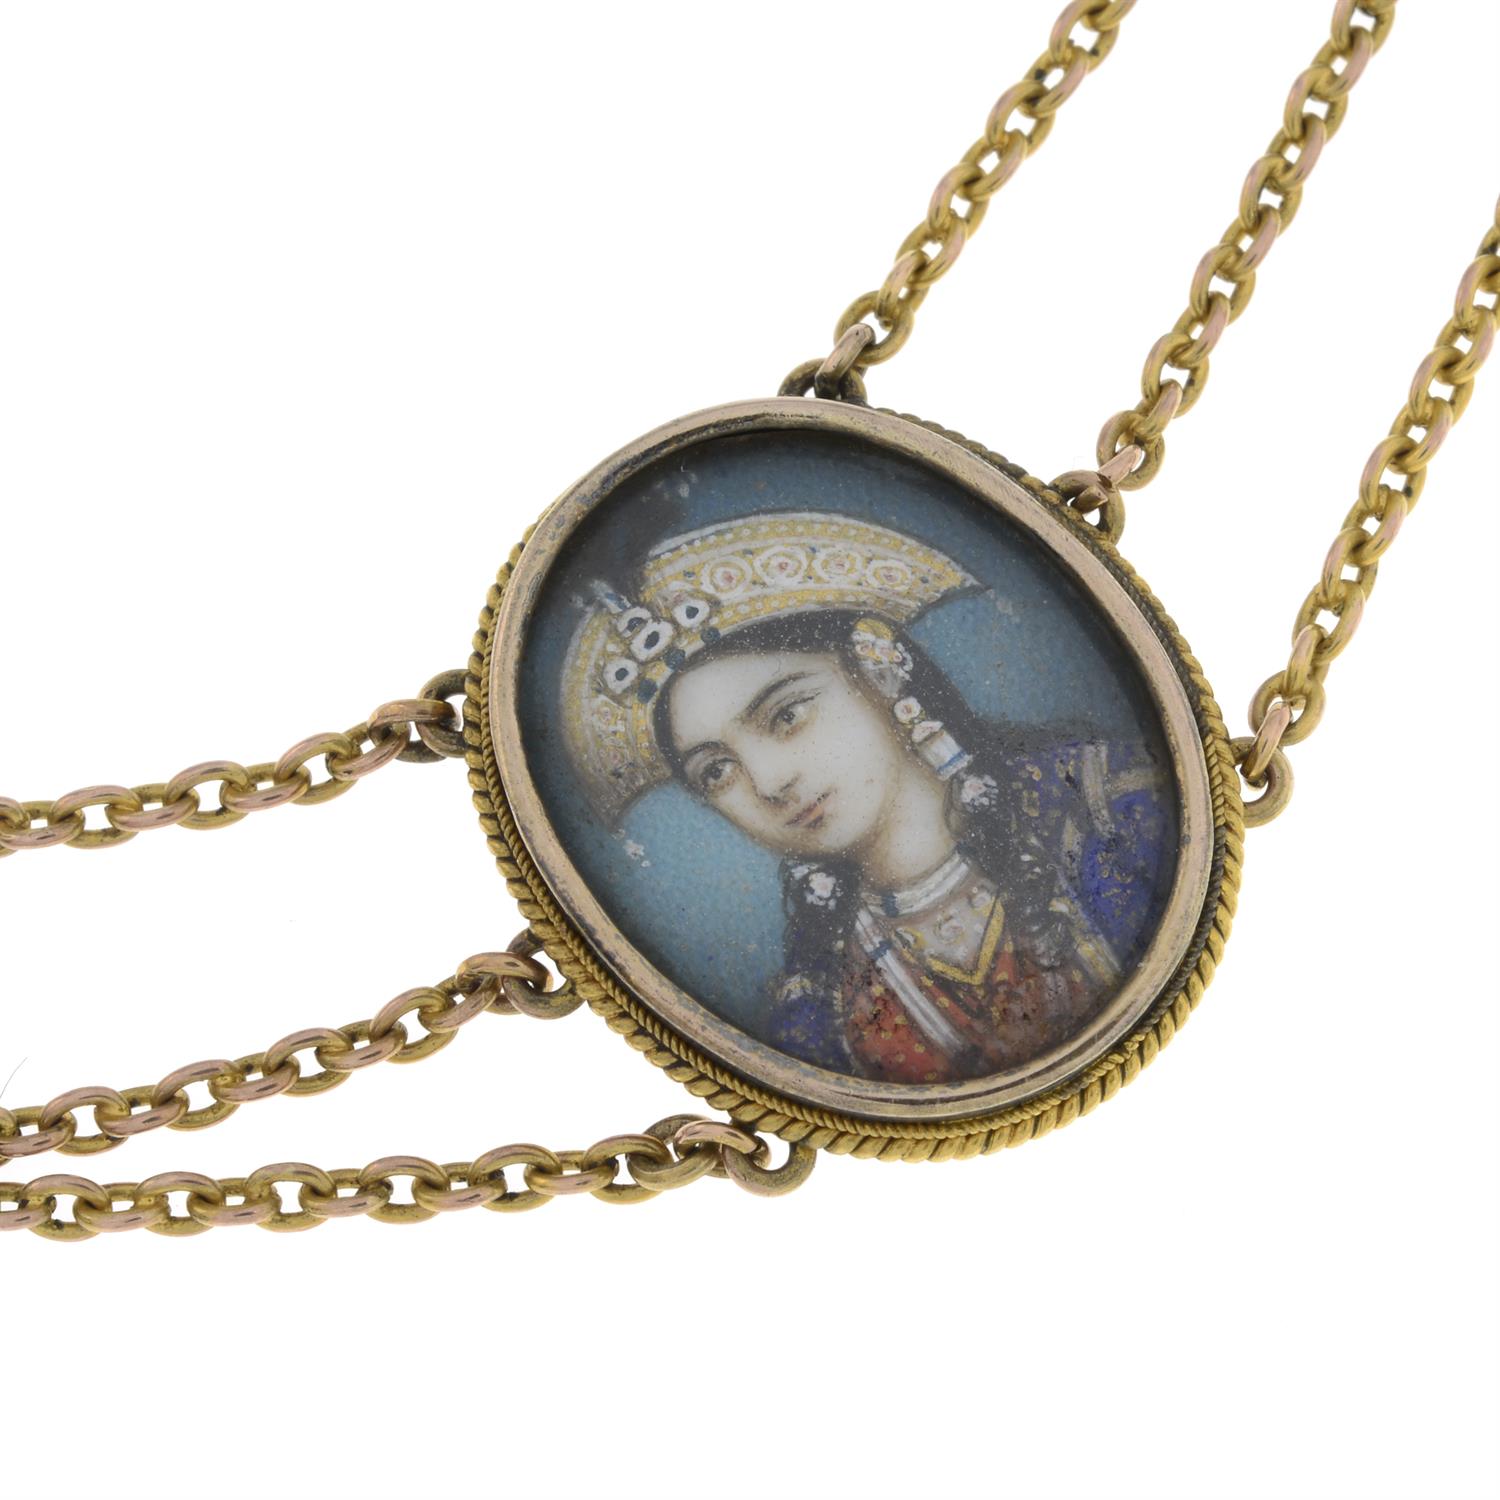 19th century gold Indian portrait miniature jewellery - Image 6 of 11